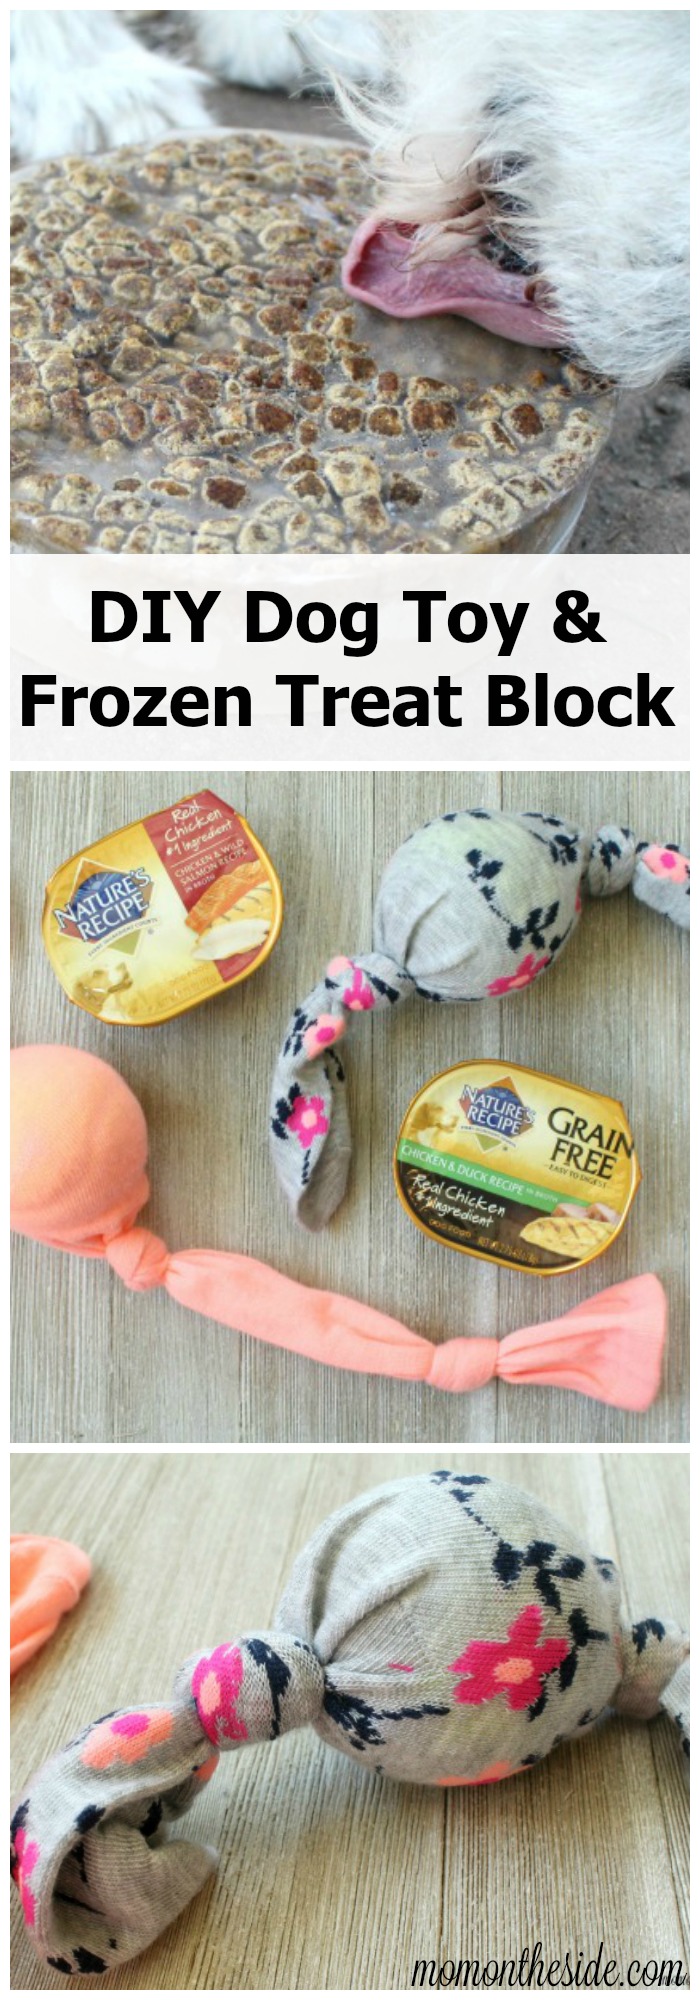 Spoil your four legged family member with a DIY Dog Toy and Frozen Treat Block with Nature's Recipe now Walmart.